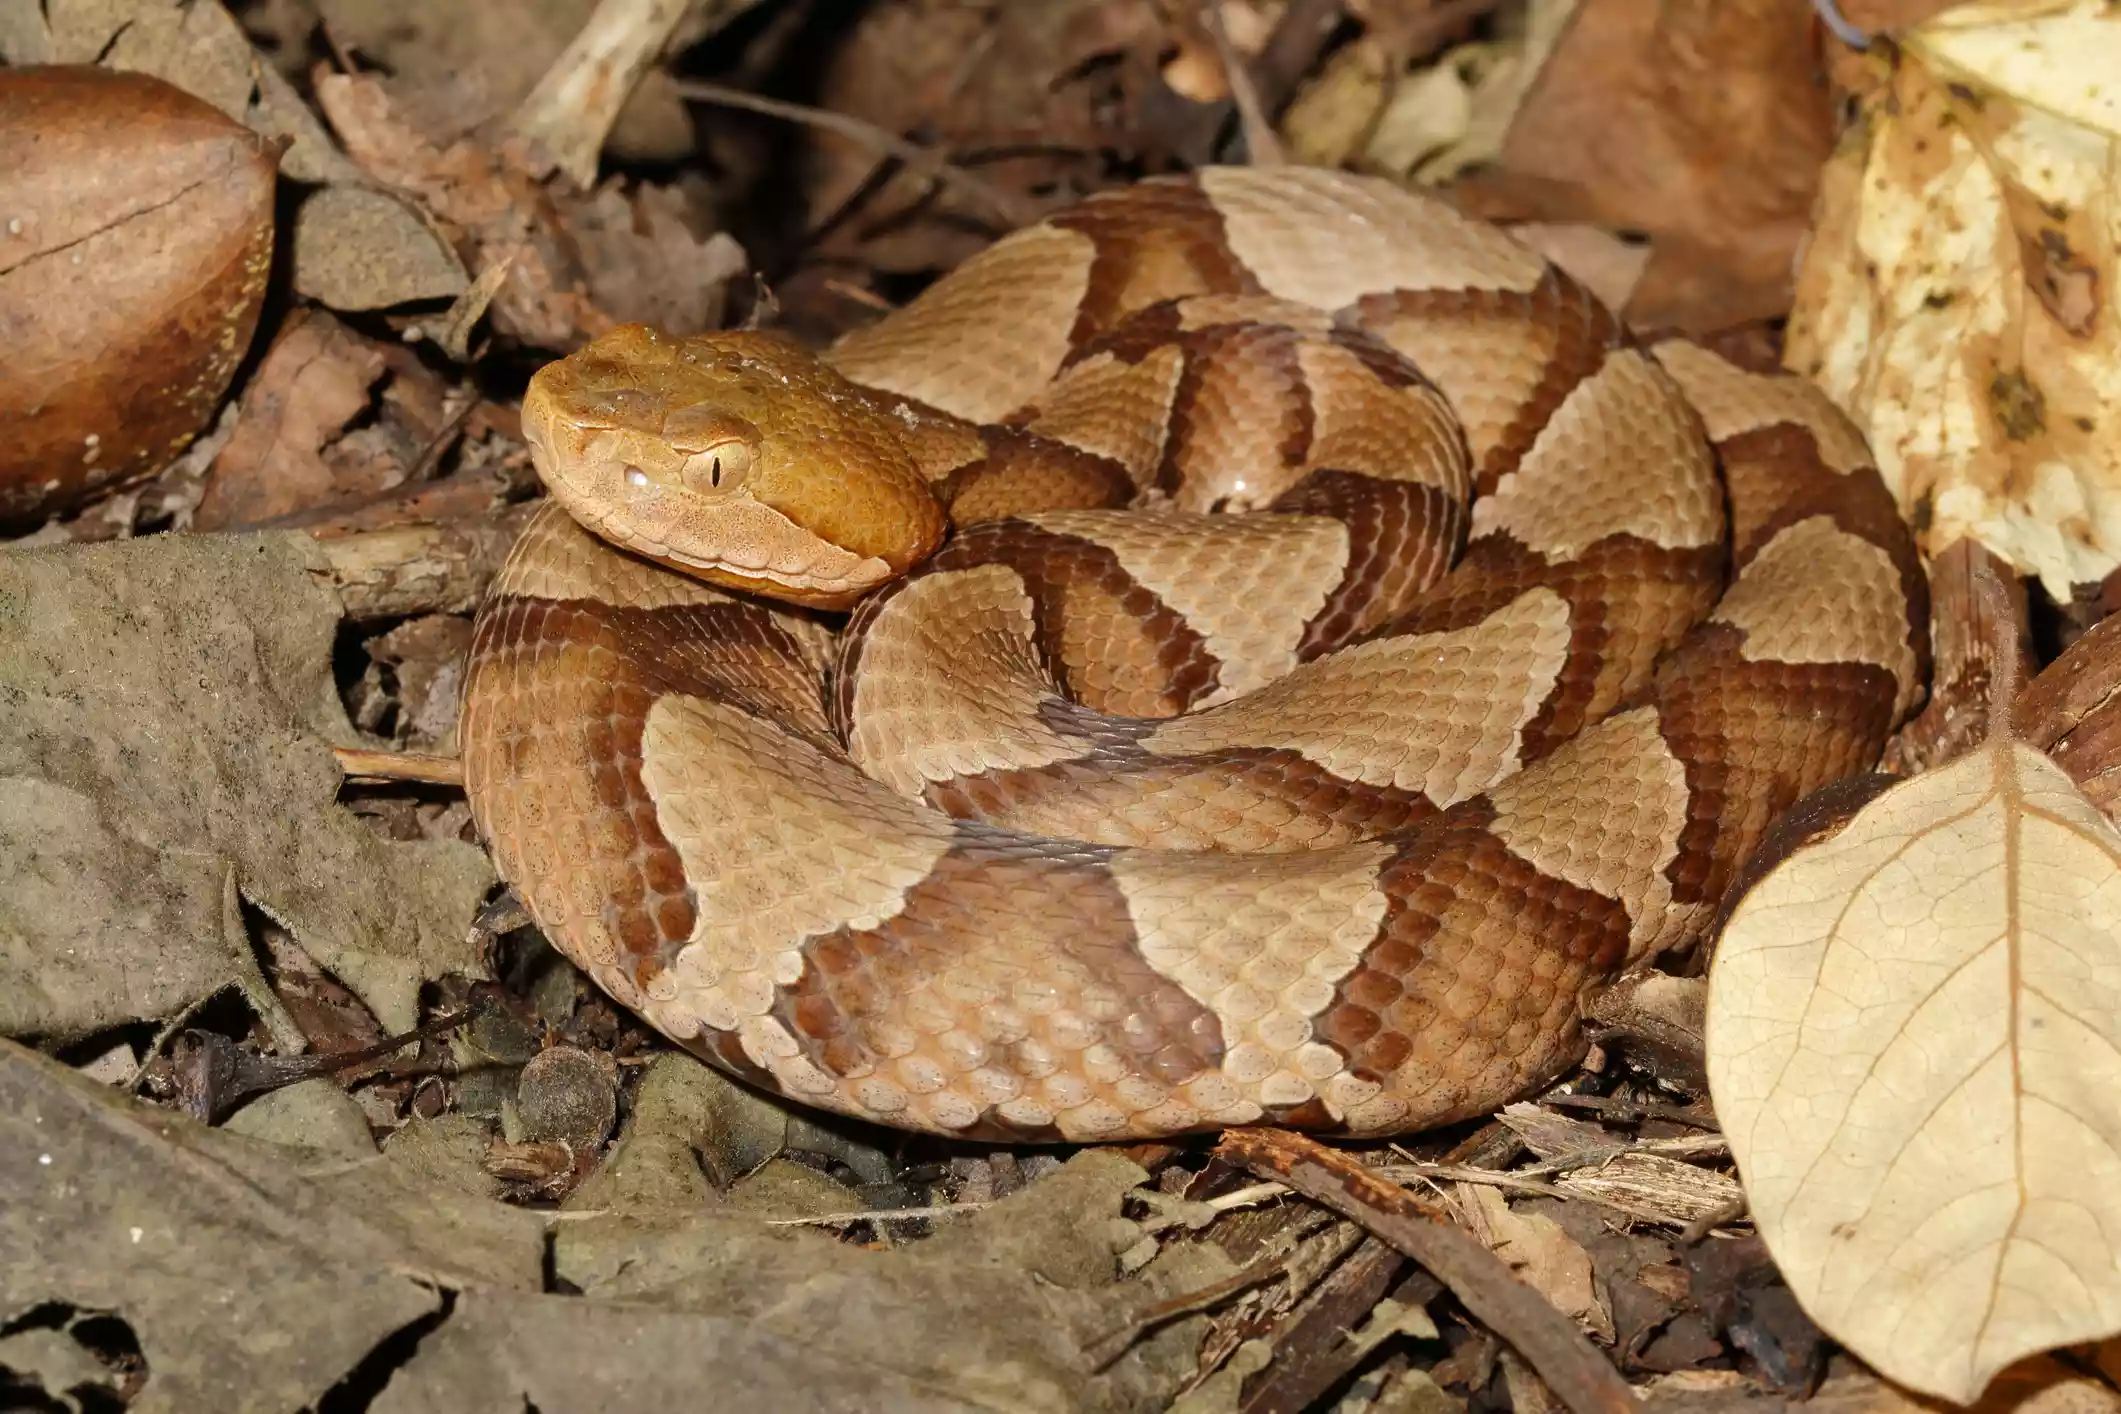 An orange and tan copperhead curled up on dried leaves